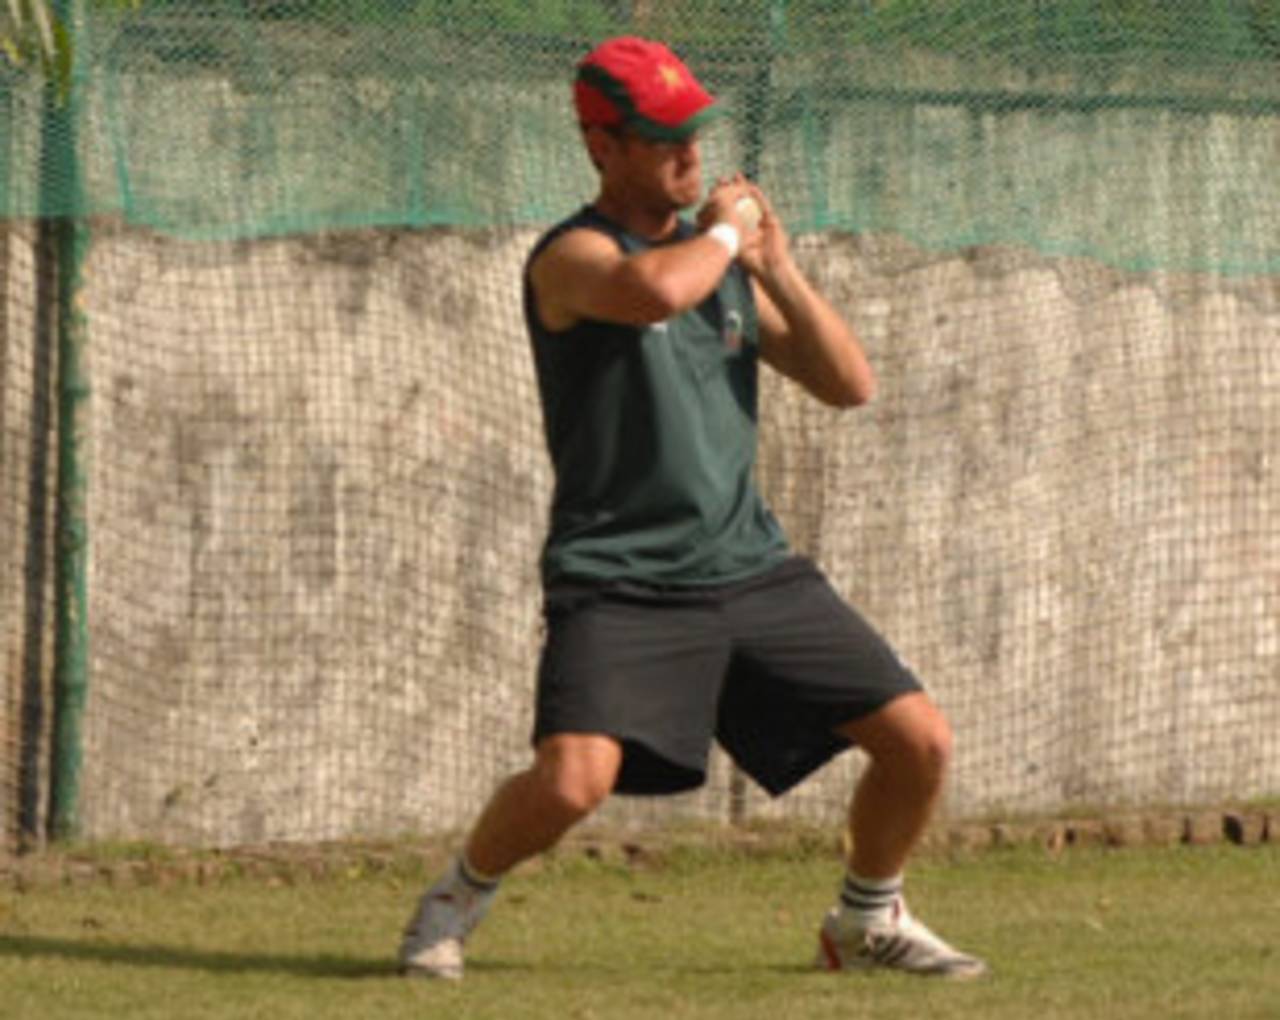 Charles Coventry takes a catch during a practice session&nbsp;&nbsp;&bull;&nbsp;&nbsp;TigerCricket.com